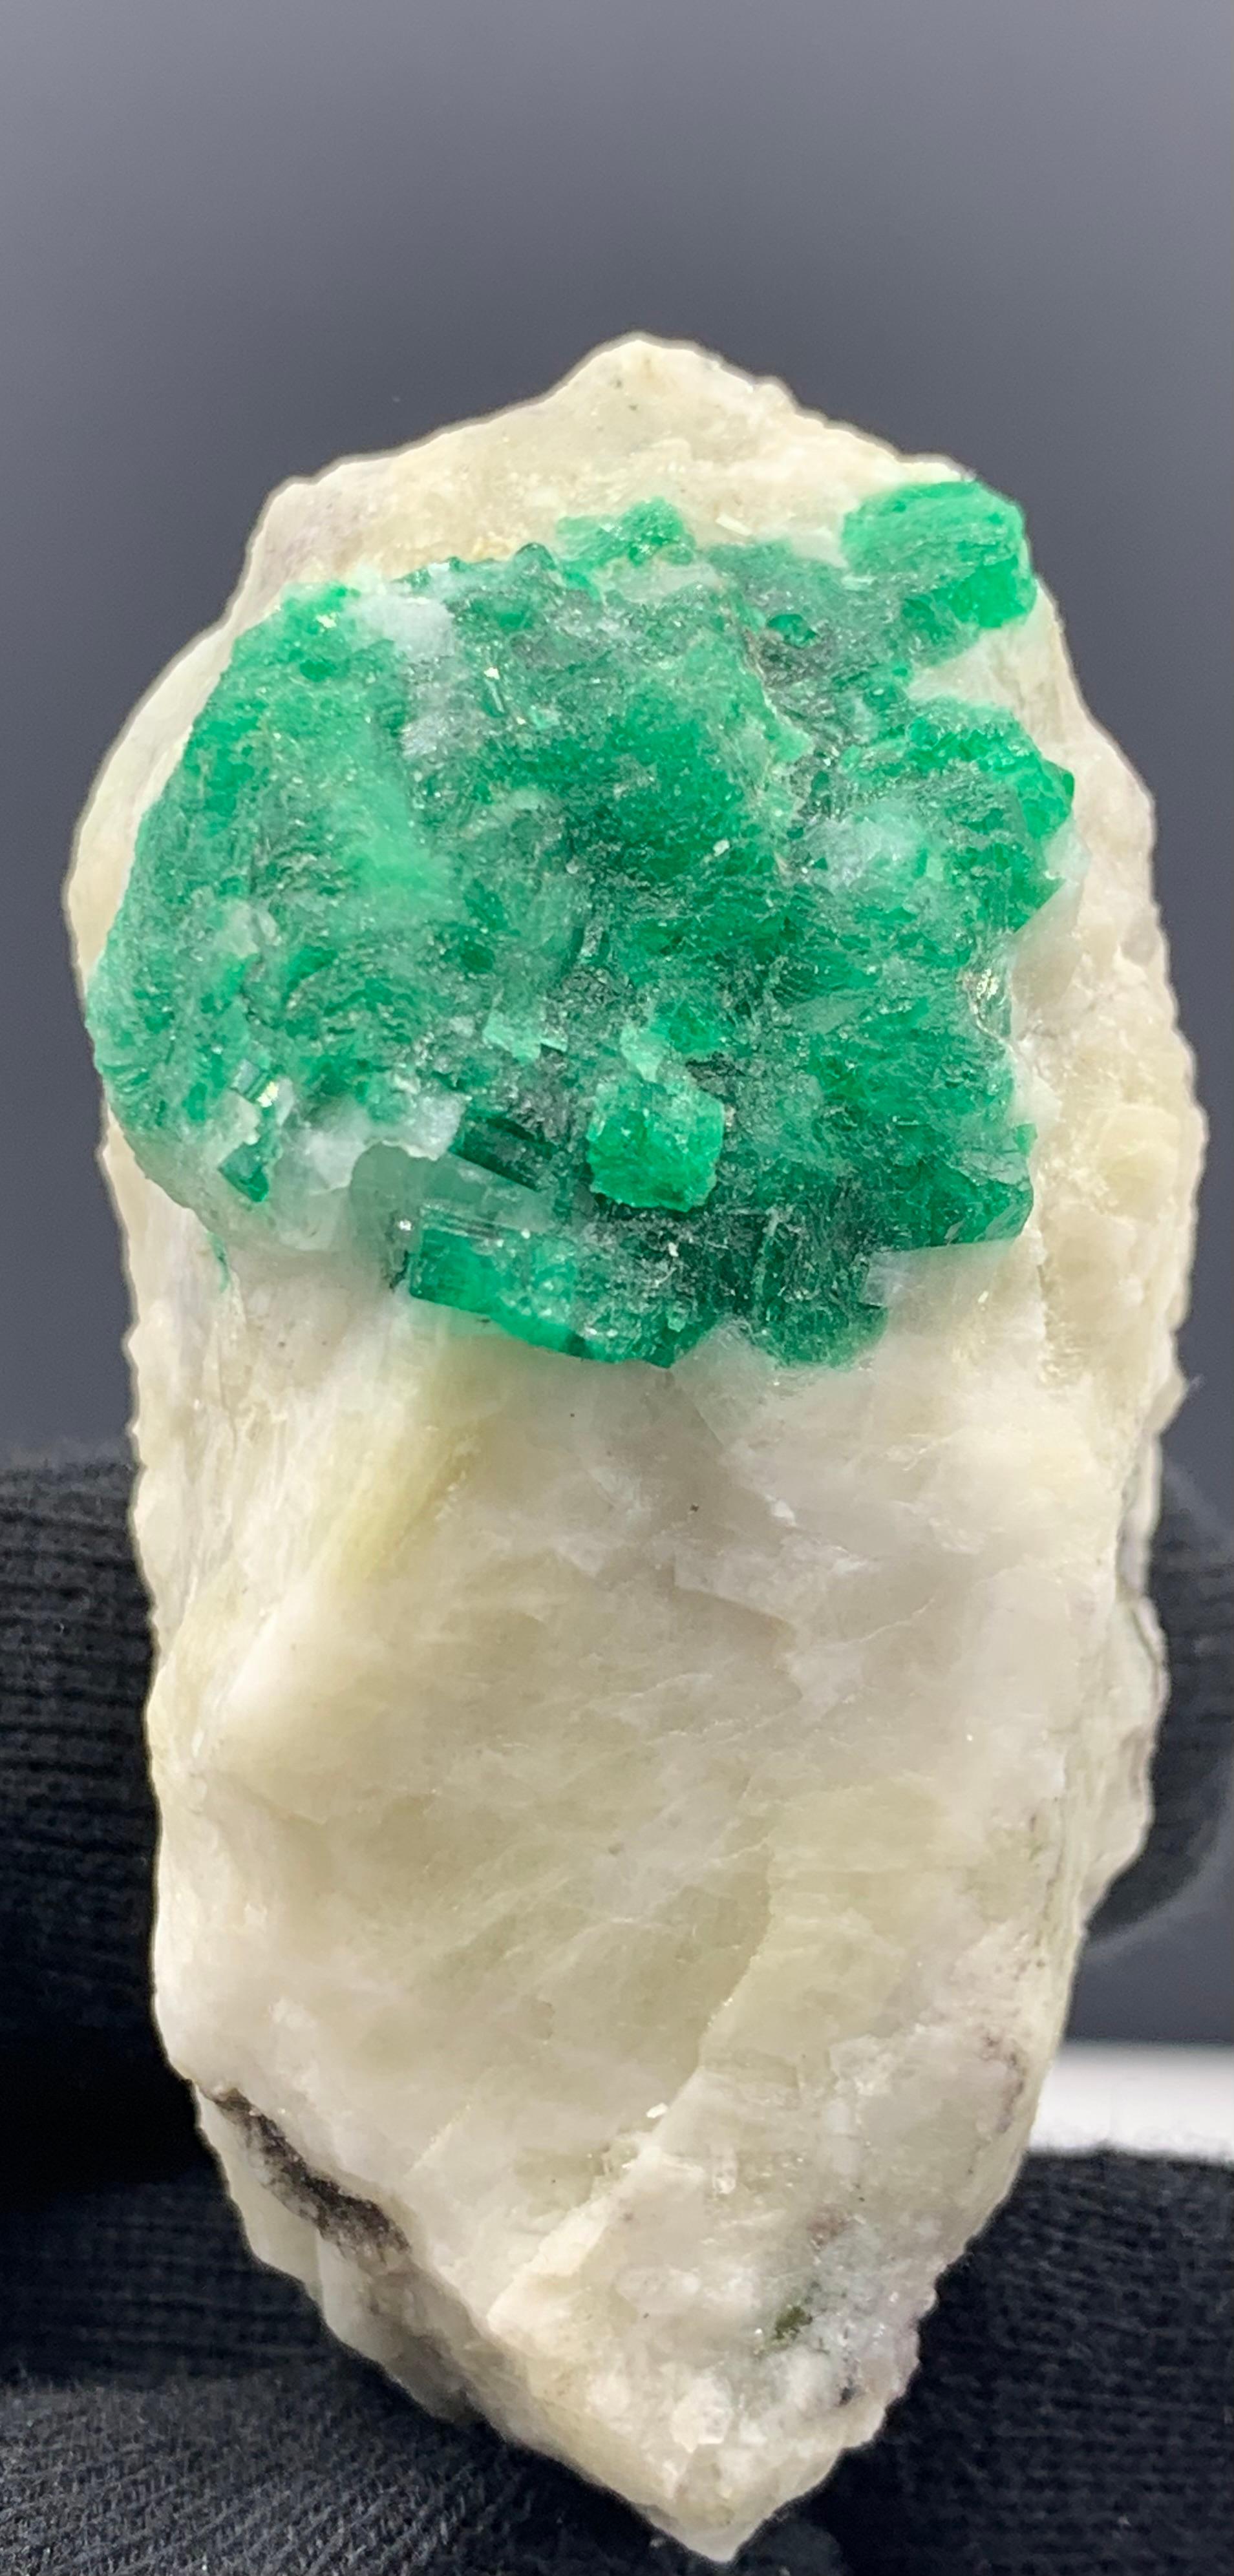 120.02 Gram Marvellous Emerald Specimen From Swat Valley, Pakistan 

Weight: 120.02 Gram 
Dimension: 6.7 x 3.3 x 3.1 cm 
Origin: Swat Valley, Khyber Pukhtunkhuwa Province, Pakistan 

Emerald has the chemical composition Be3Al2(SiO3)6 and is